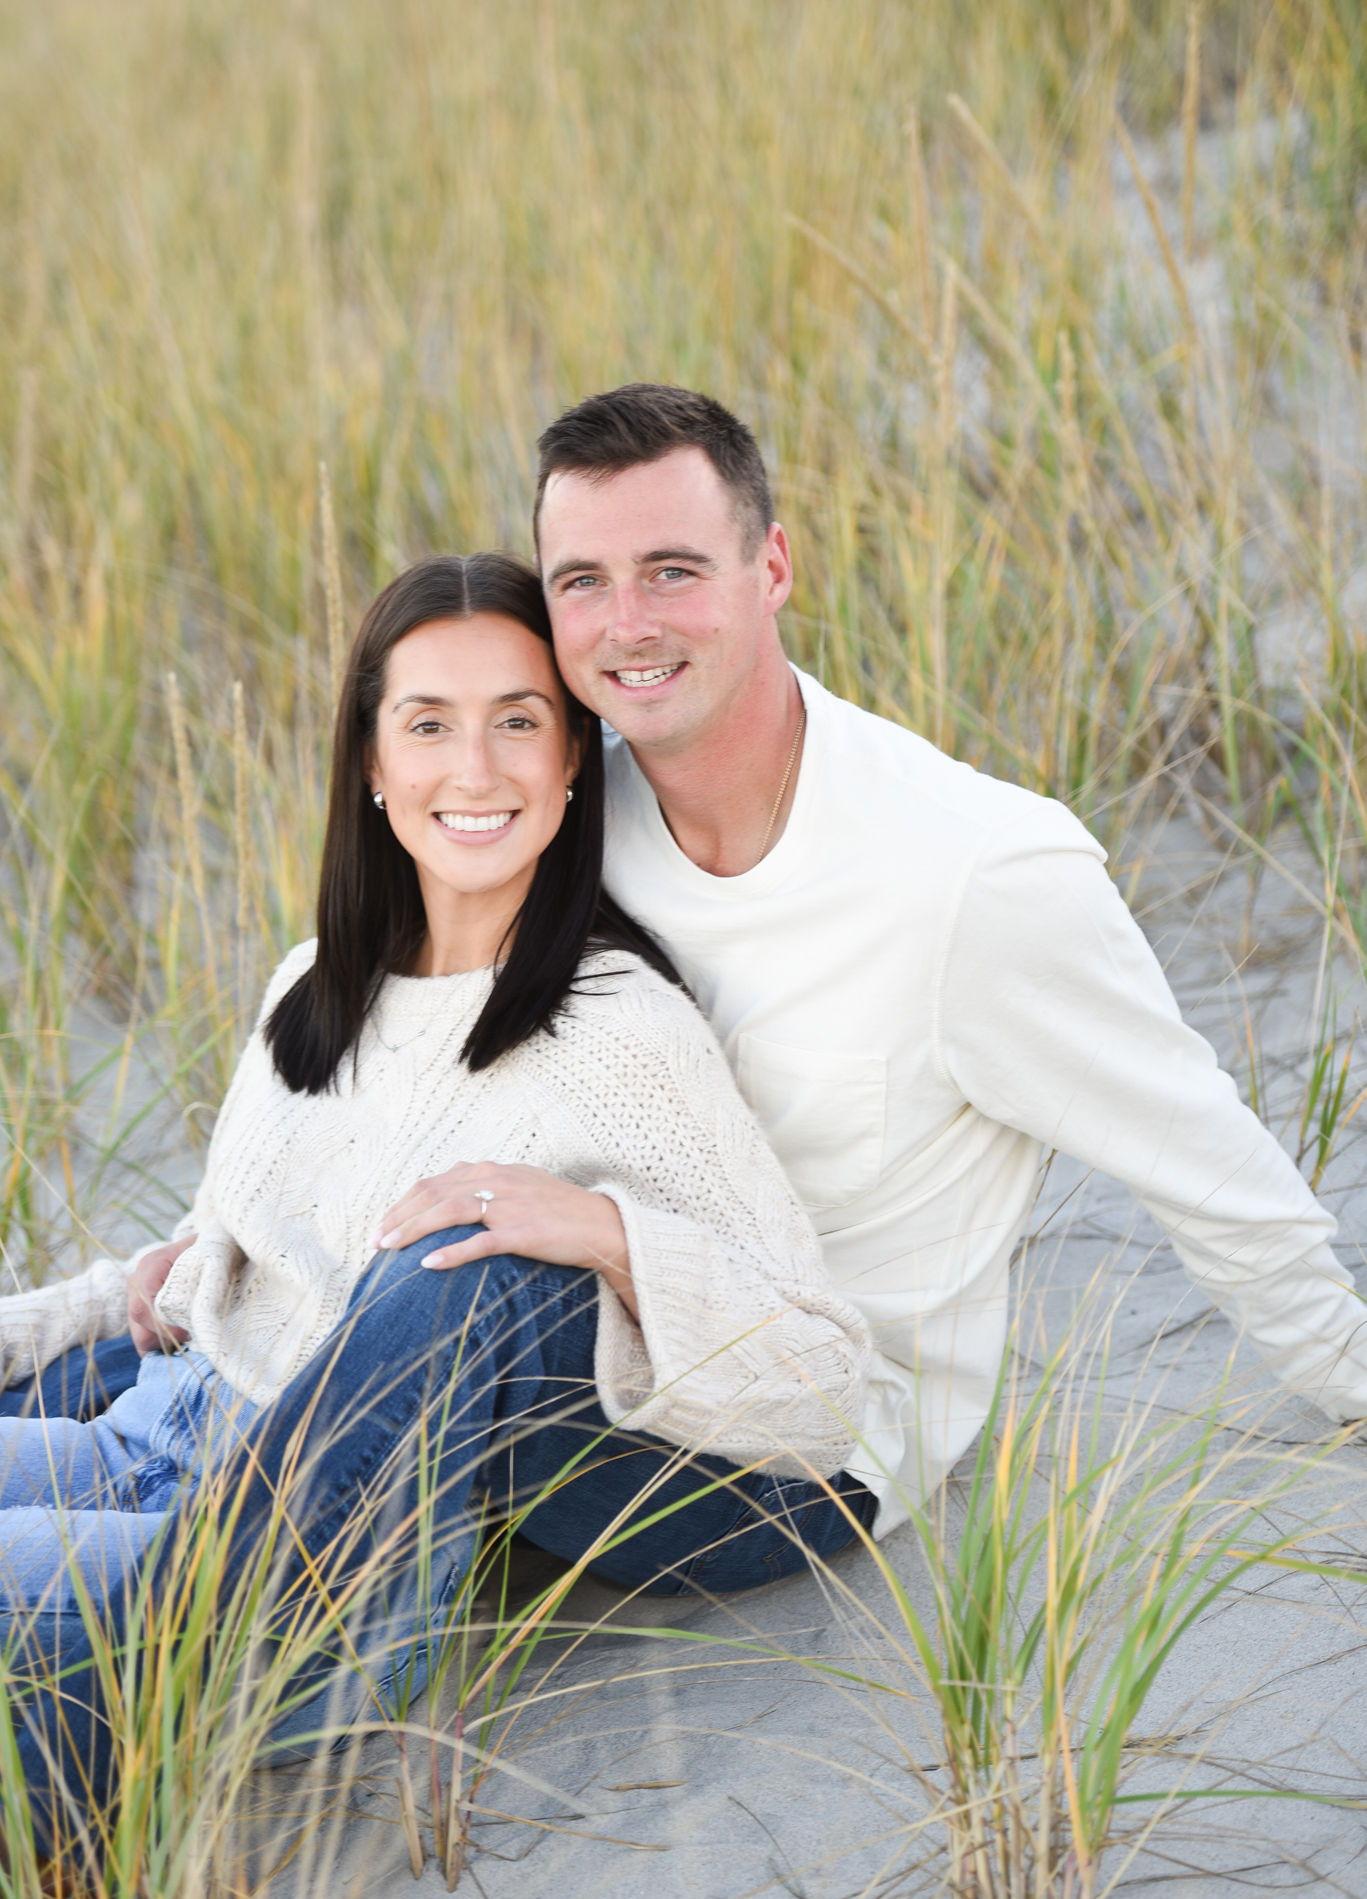 The Wedding Website of Madeline Anastasia and Bryce Parker